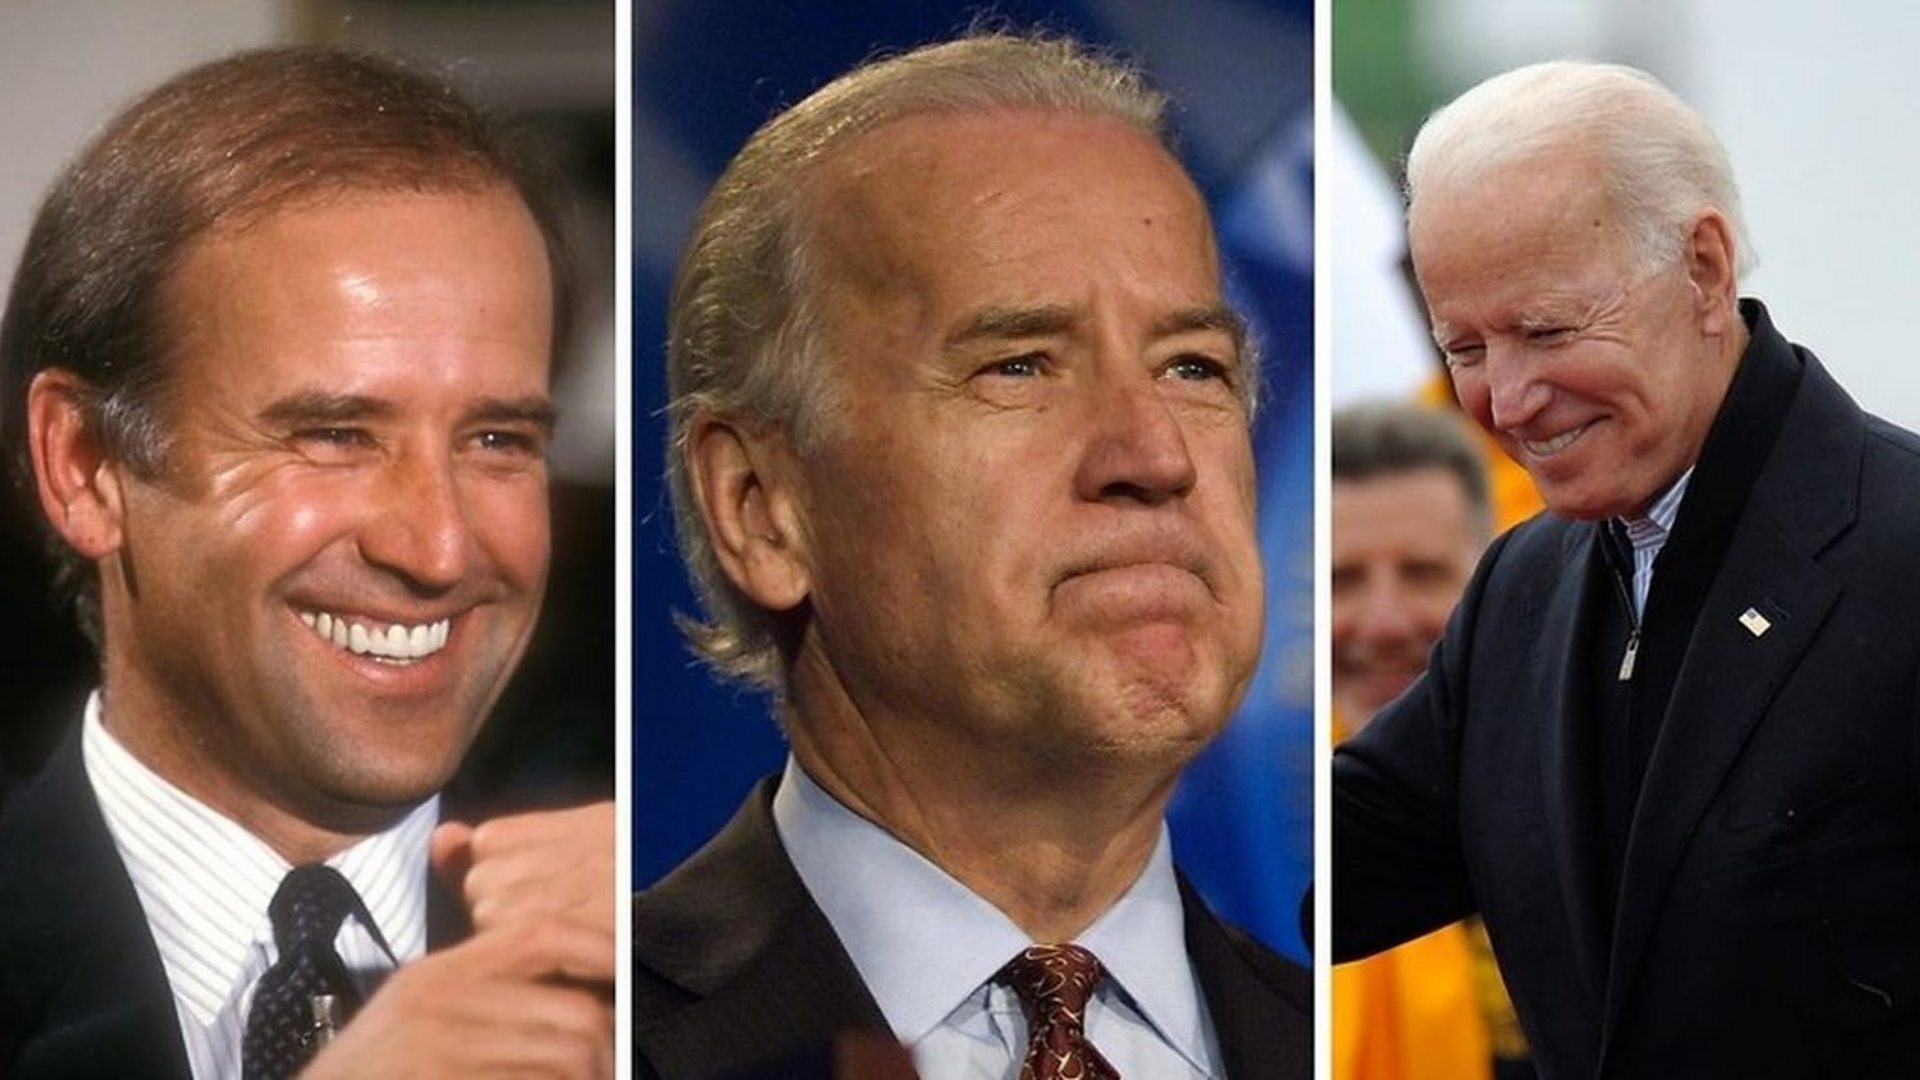 how many people actually support joe biden - Biden|President|Joe|Years|Trump|Delaware|Vice|Time|Obama|Senate|States|Law|Age|Campaign|Election|Administration|Family|House|Senator|Office|School|Wife|People|Hunter|University|Act|State|Year|Life|Party|Committee|Children|Beau|Daughter|War|Jill|Day|Facts|Americans|Presidency|Joe Biden|United States|Vice President|White House|Law School|President Trump|Foreign Relations Committee|Donald Trump|President Biden|Presidential Campaign|Presidential Election|Democratic Party|Syracuse University|United Nations|Net Worth|Barack Obama|Judiciary Committee|Neilia Hunter|U.S. Senate|Hillary Clinton|New York Times|Obama Administration|Empty Store Shelves|Systemic Racism|Castle County Council|Archmere Academy|U.S. Senator|Vice Presidency|Second Term|Biden Administration